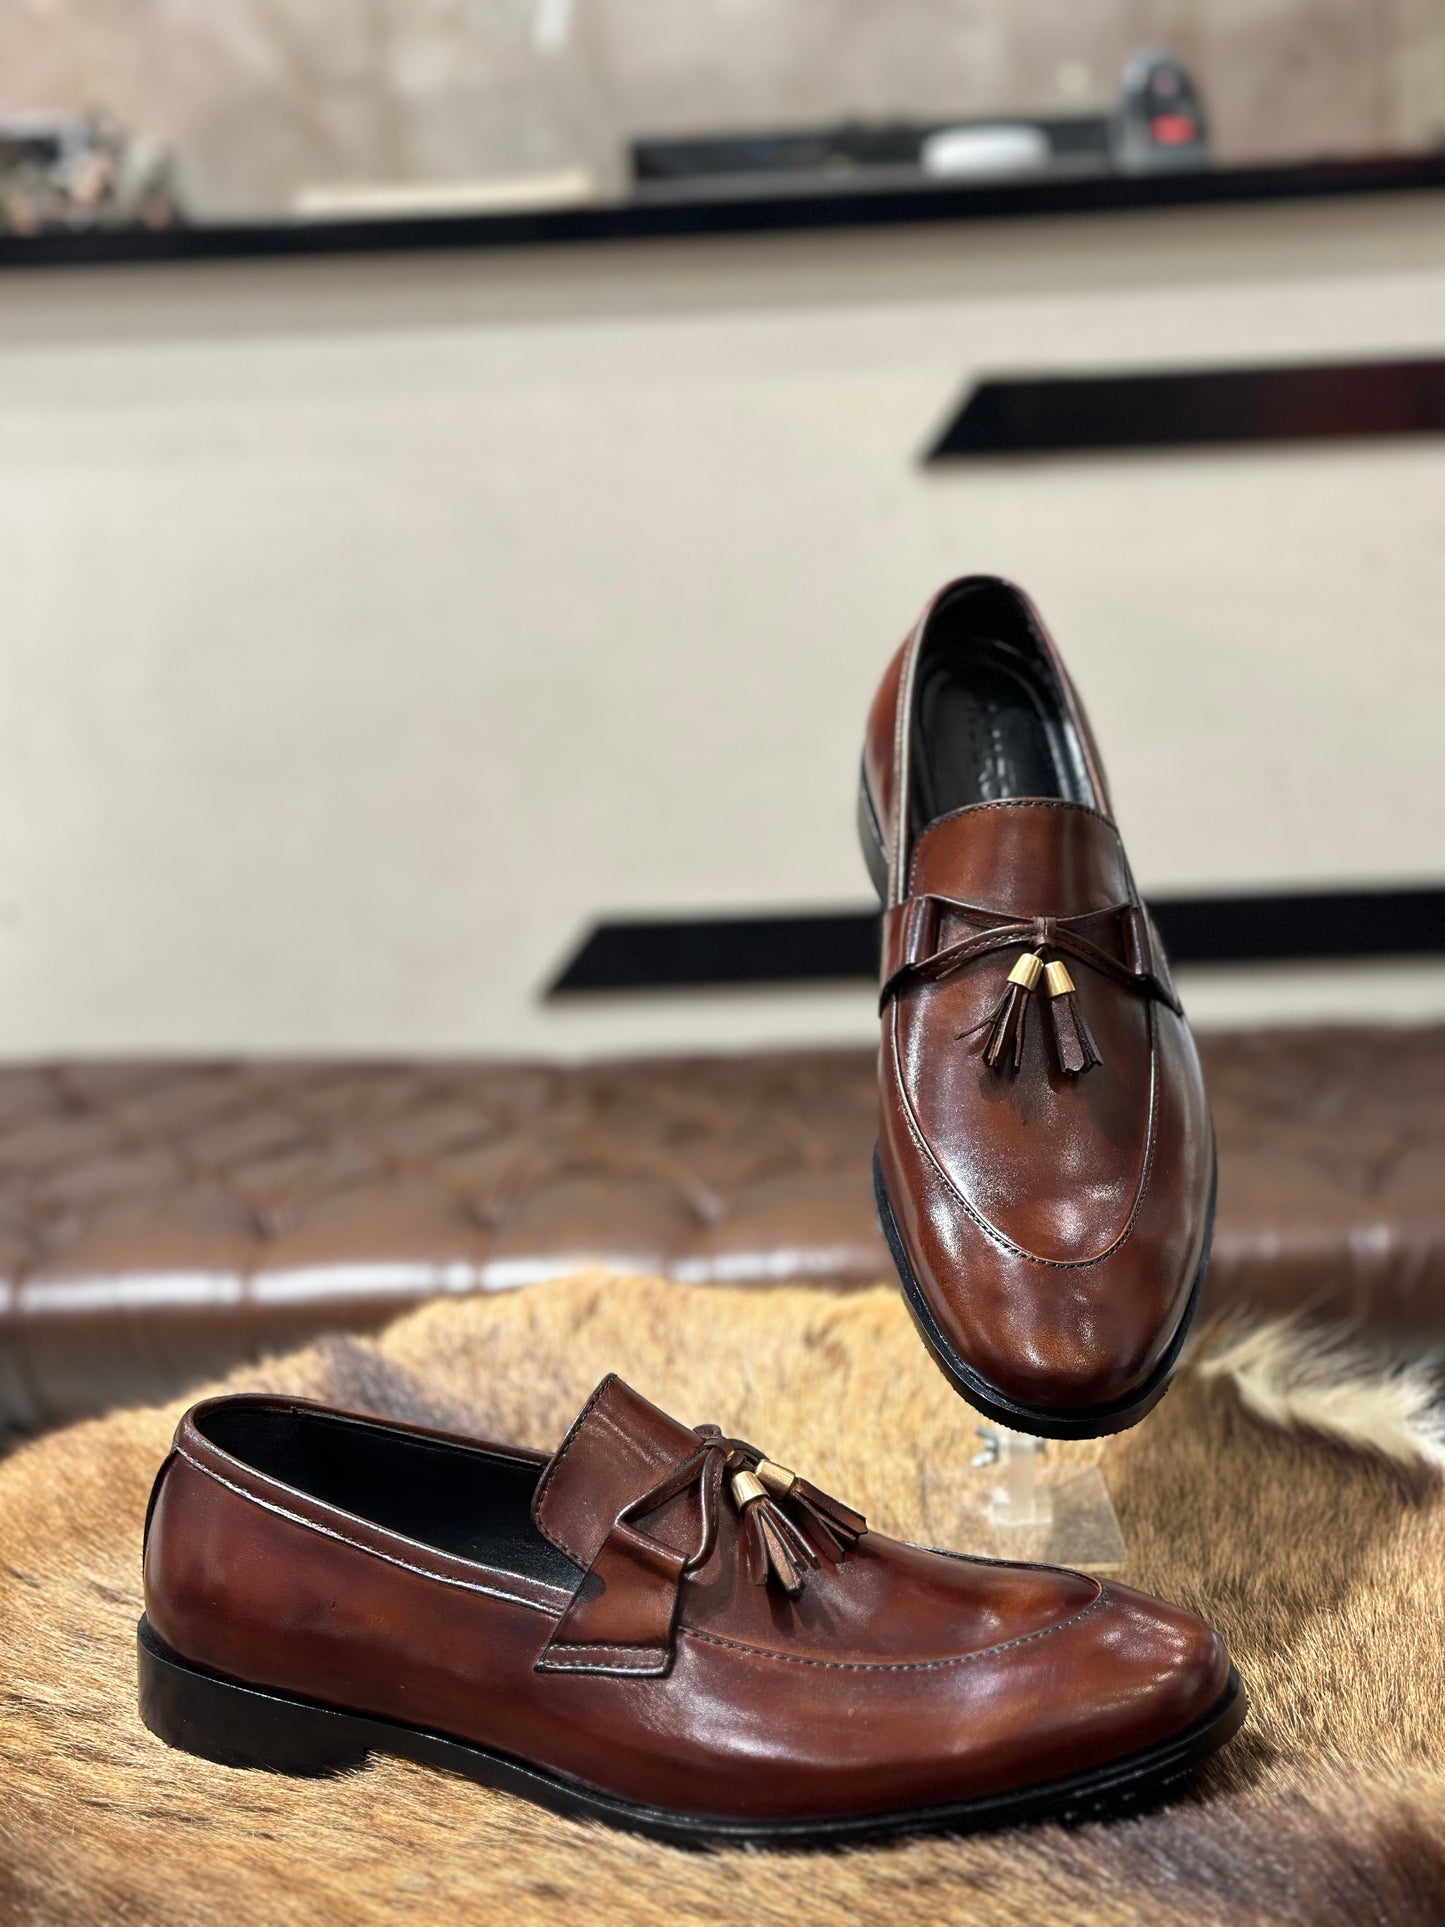 Brown Shaded Tassel Loafers